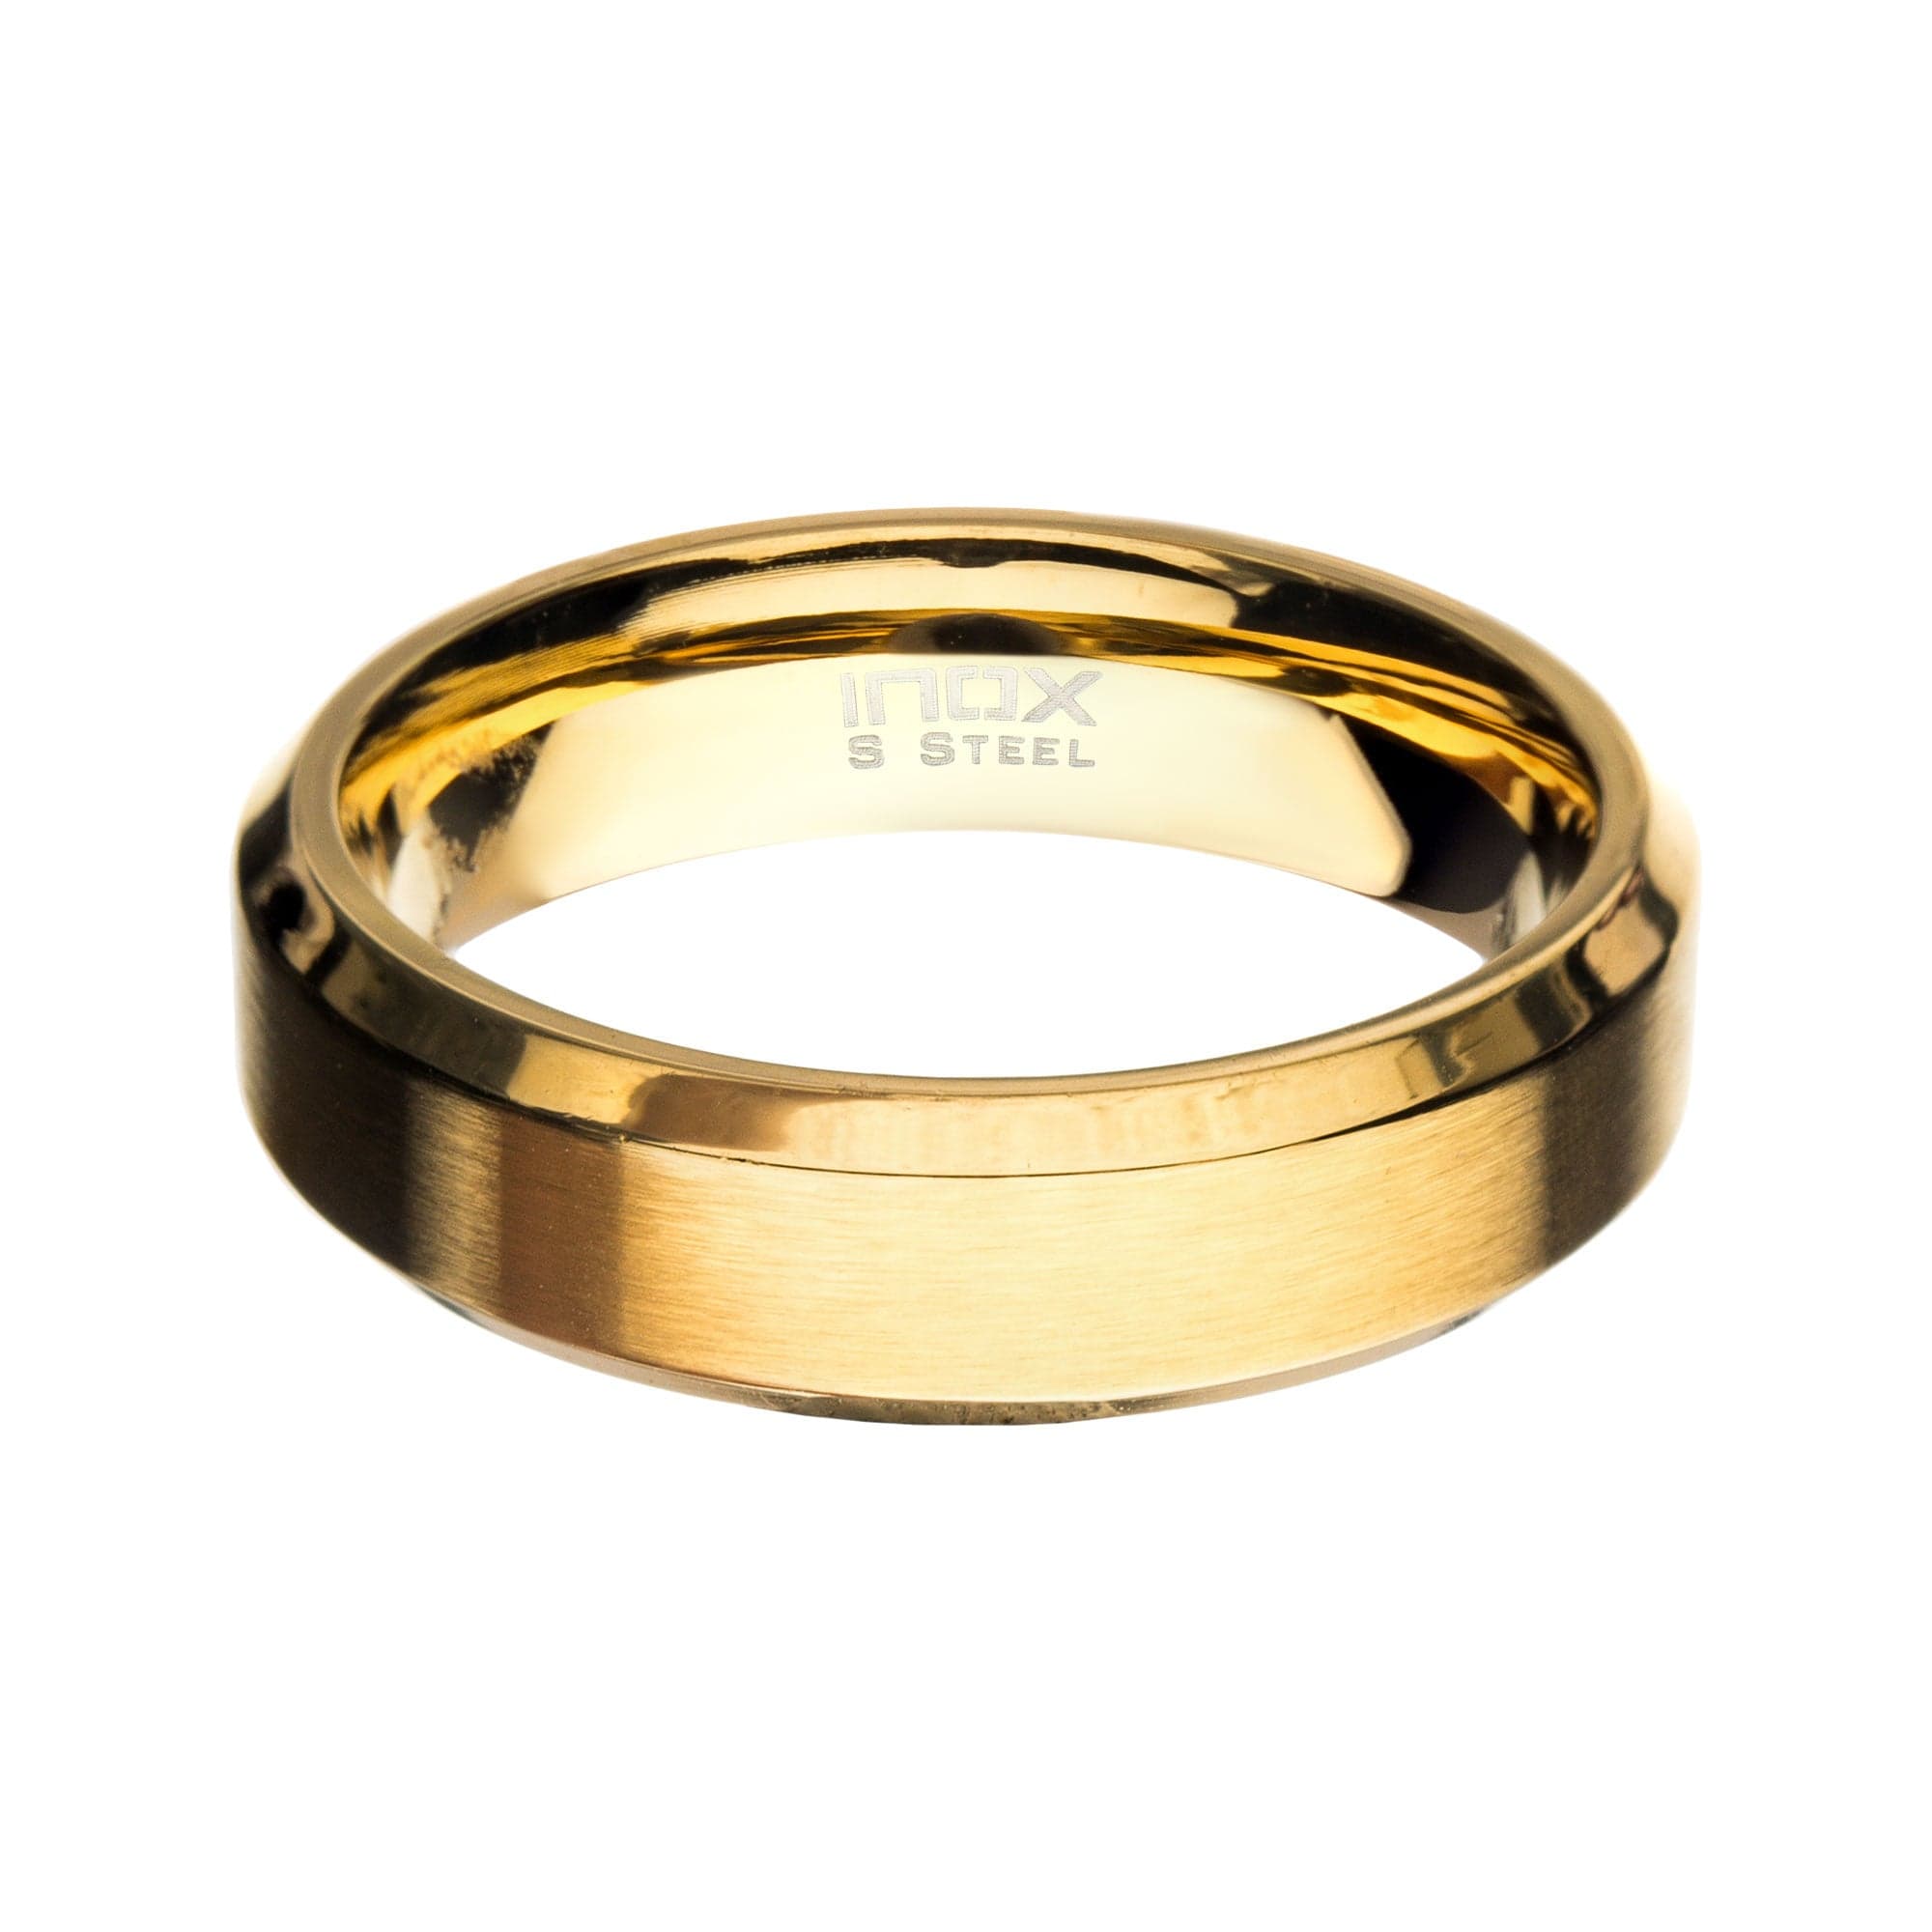 INOX JEWELRY Rings 18K Golden Tone Ion Plated Stainless Steel 6mm Matte Finish Beveled Band Ring